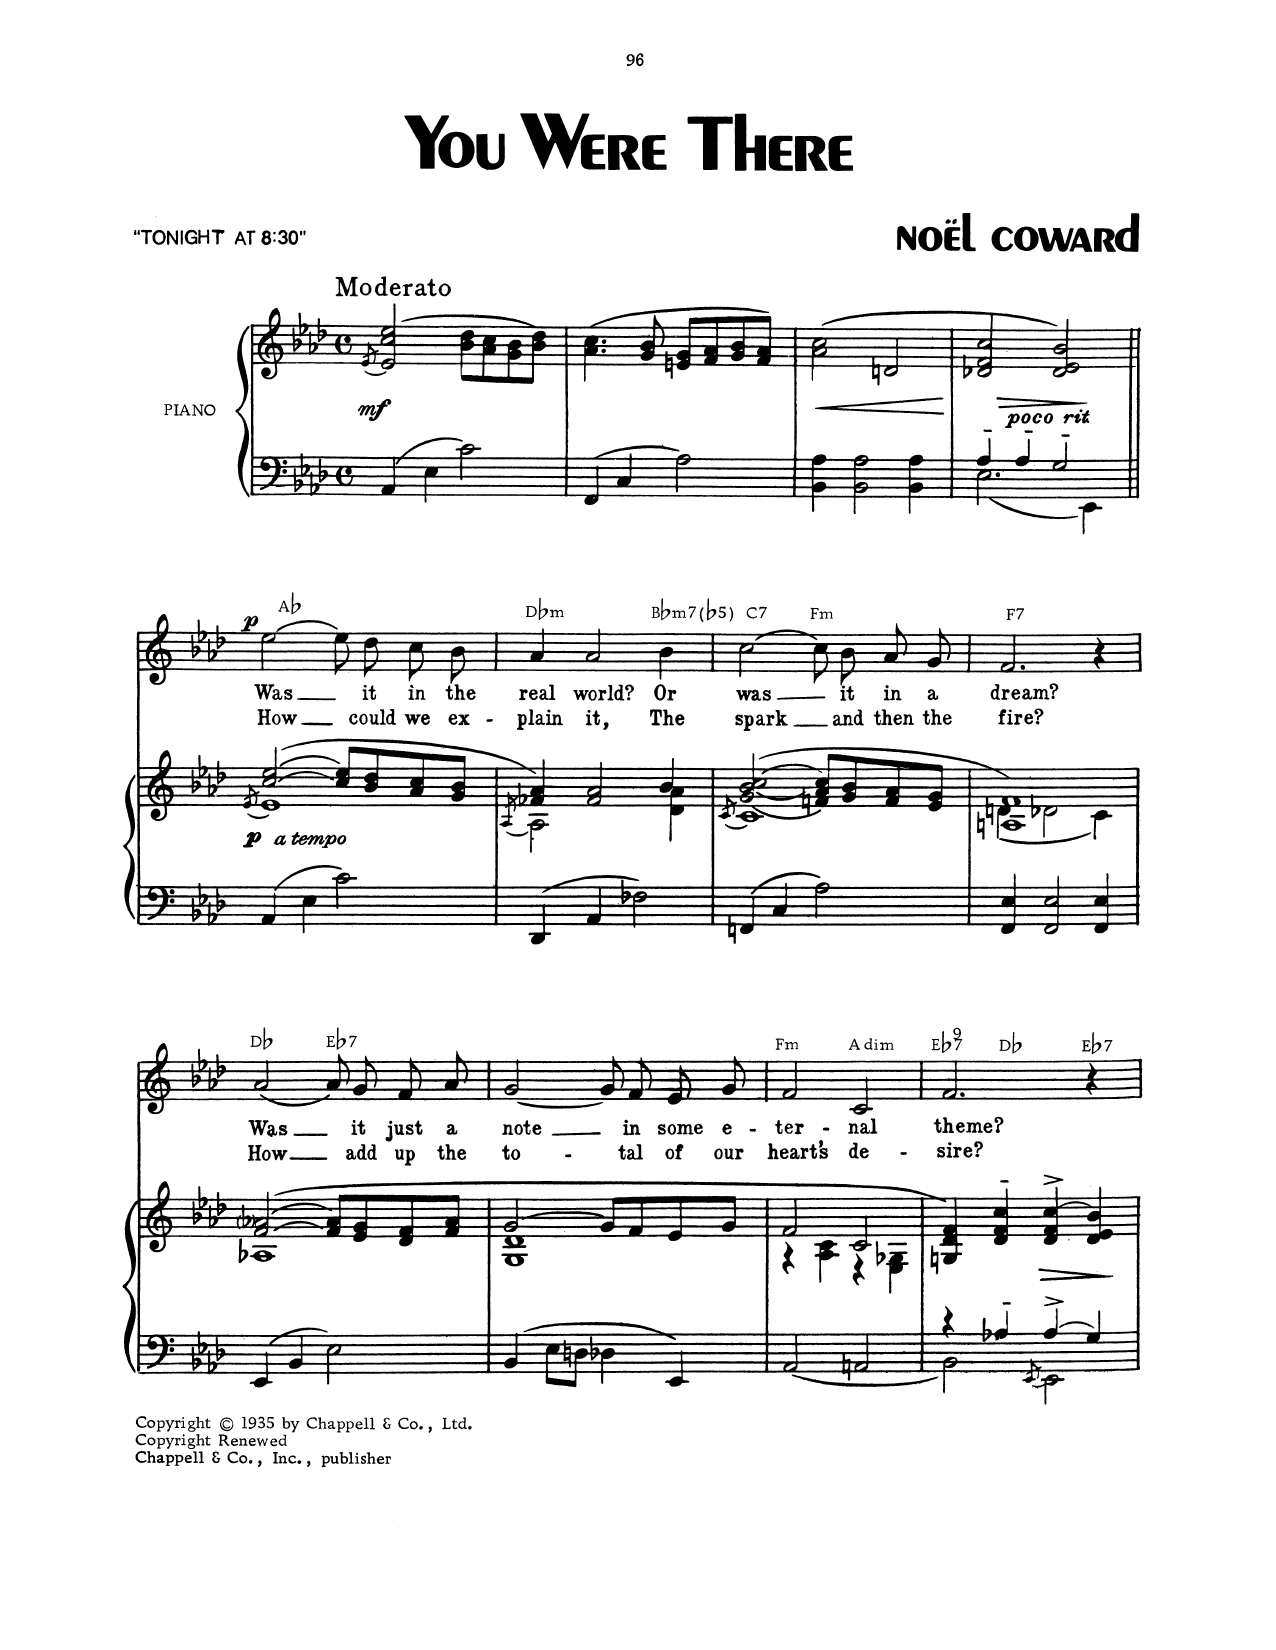 Download Noel Coward You Were There Sheet Music